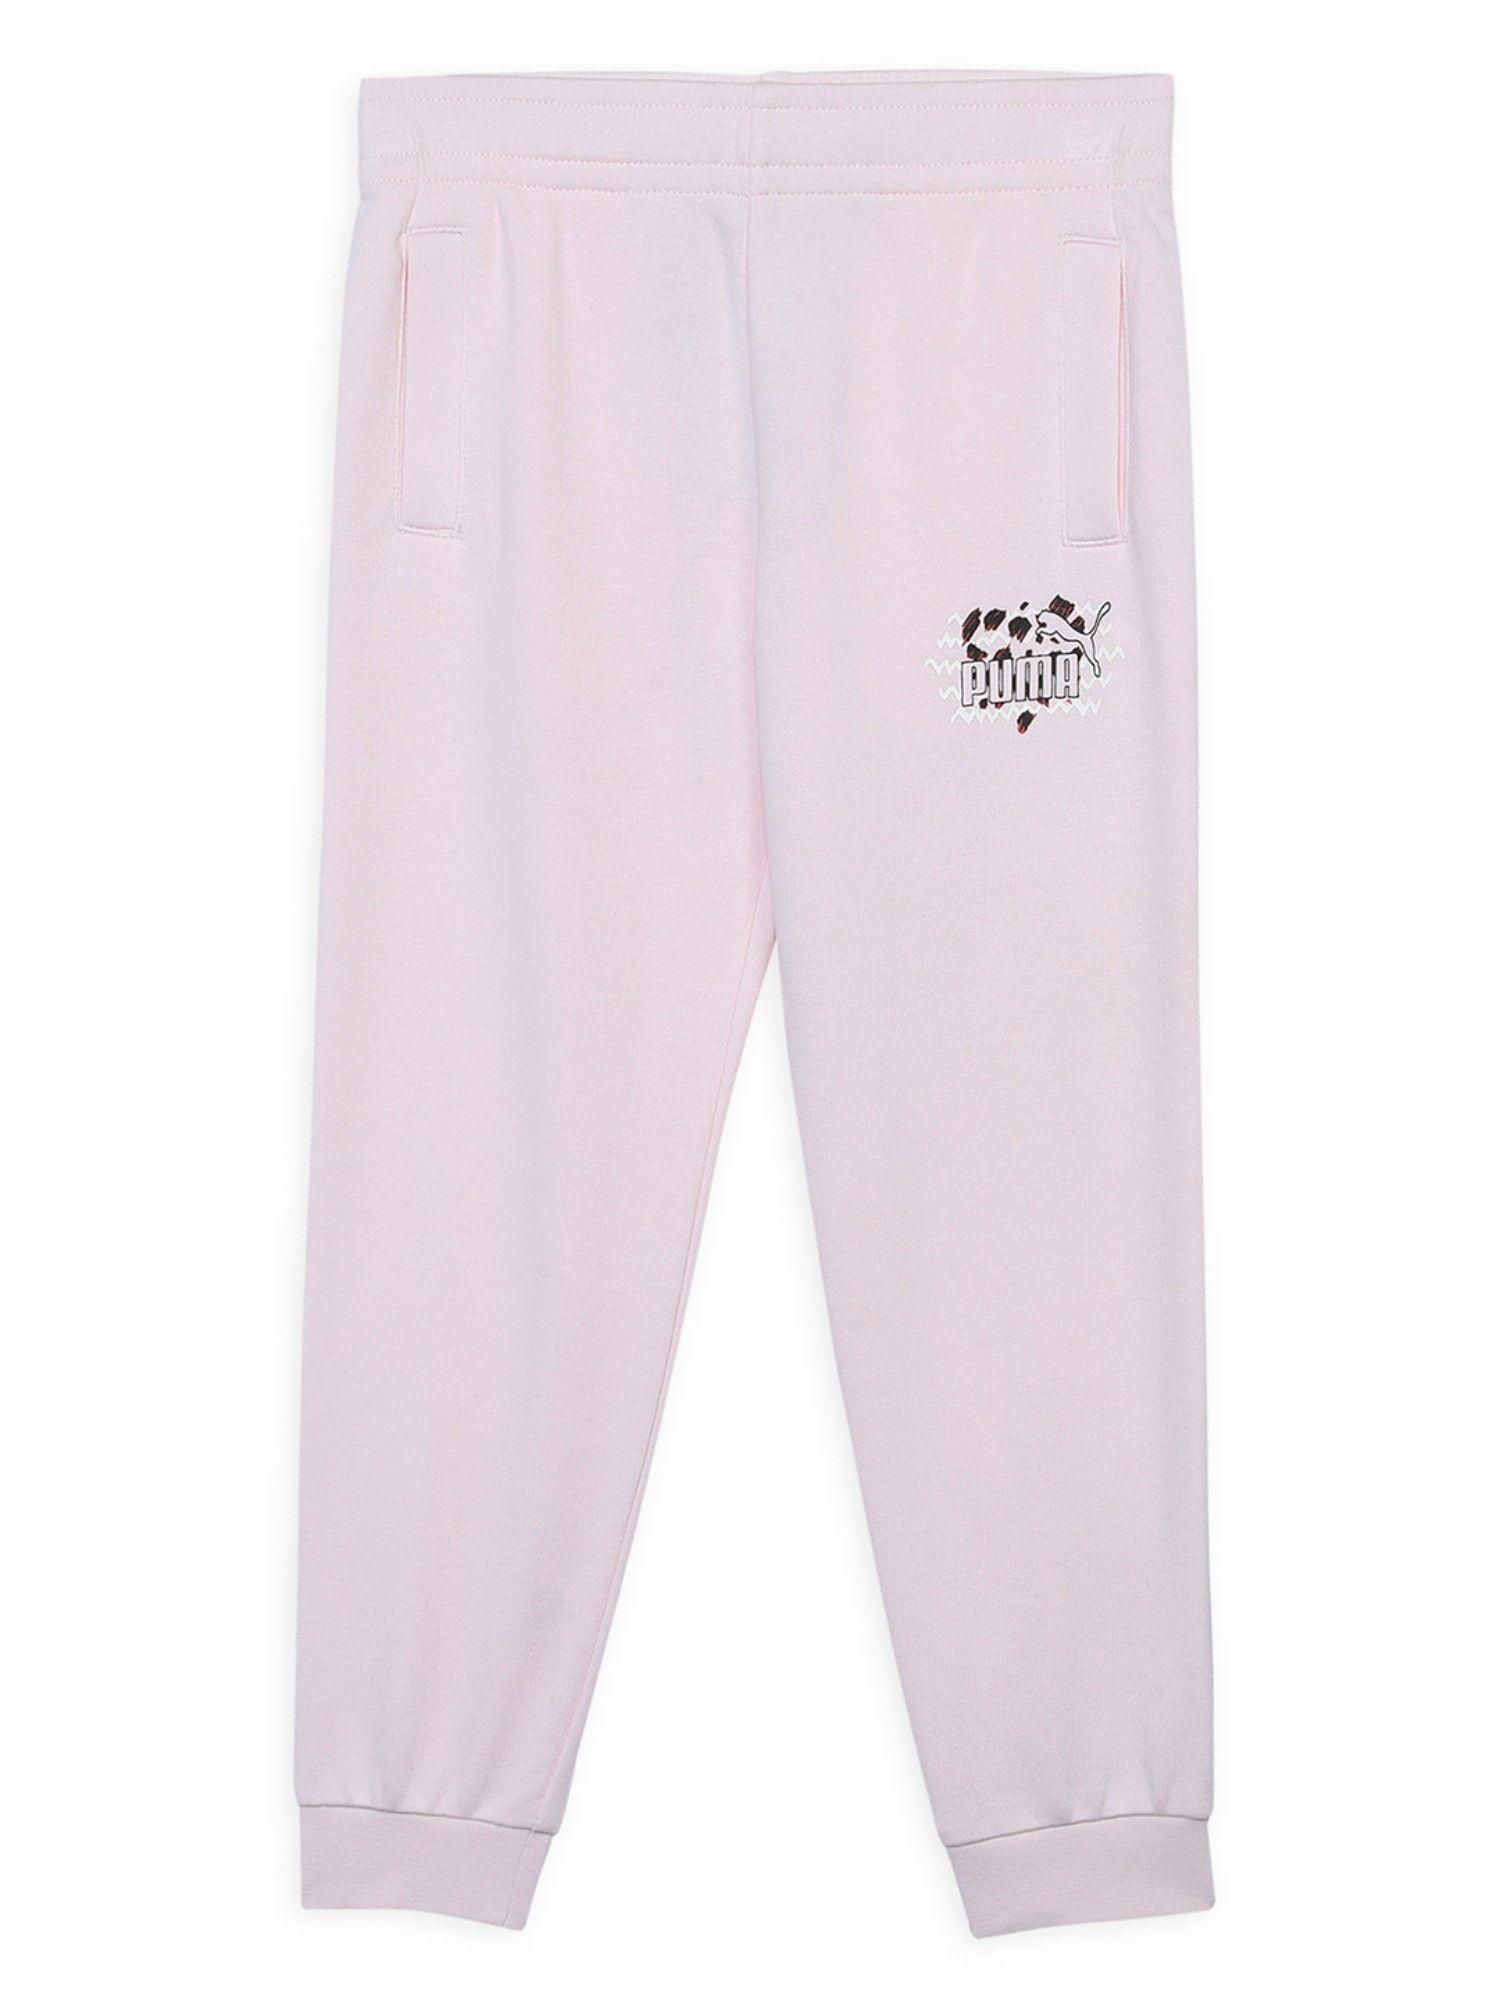 essentials-mix-match-boys-pink-knitted-joggers